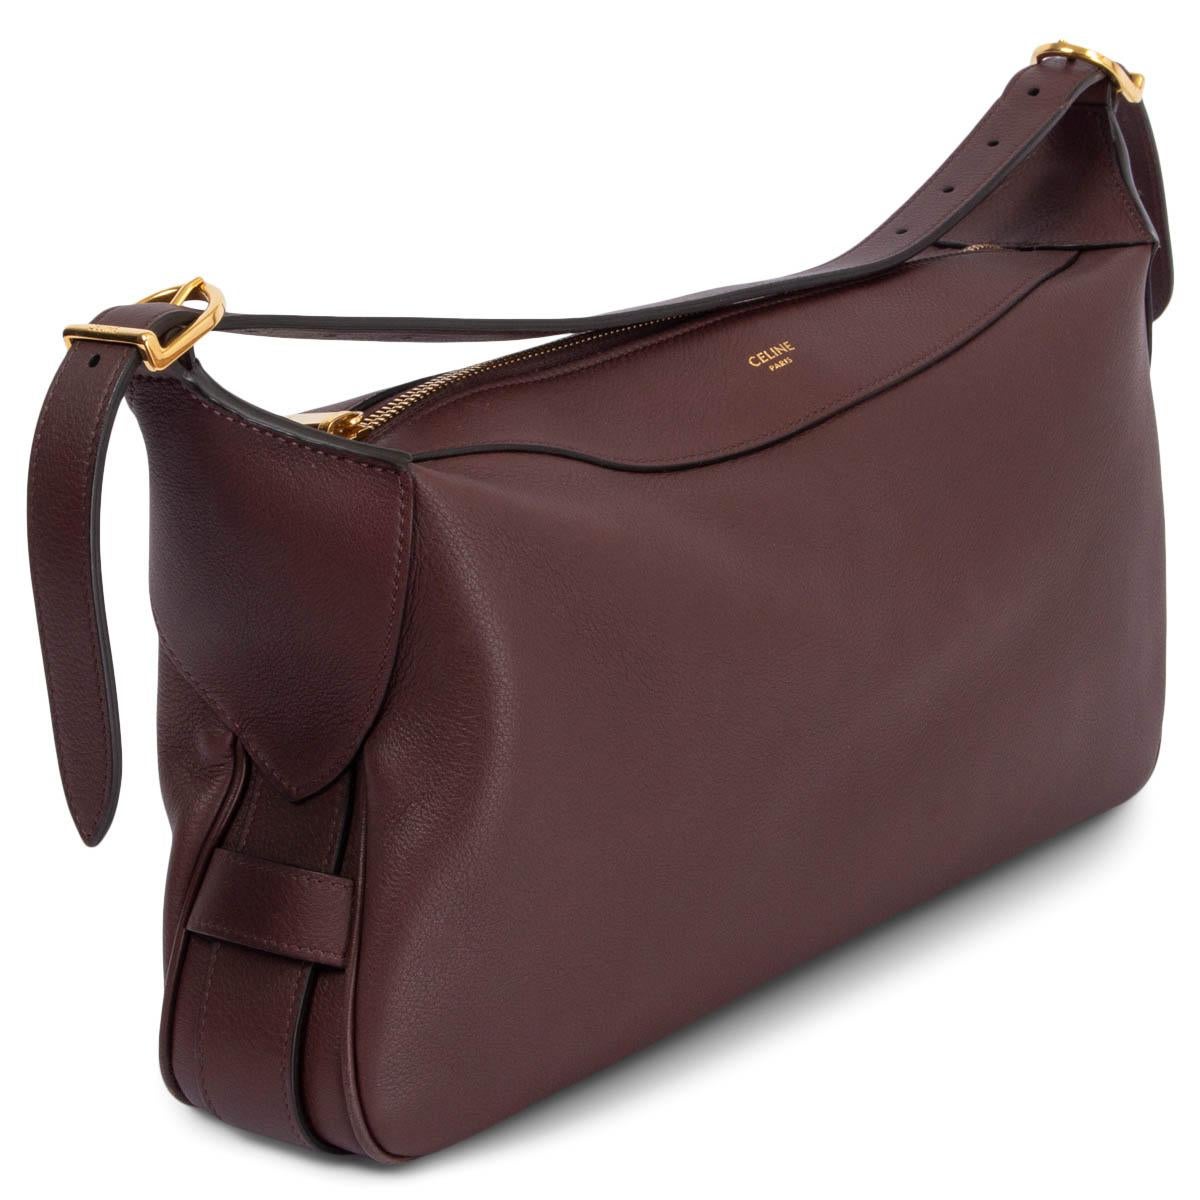 100% authentic Celine Medium Romy shoulder bag in hickory (burgundy) supple calfskin featuring gold-tone hardware. Opens with a zipper on top and is lined in burgundy suede. The design comes with a adjustable handle. Has been carried and is in